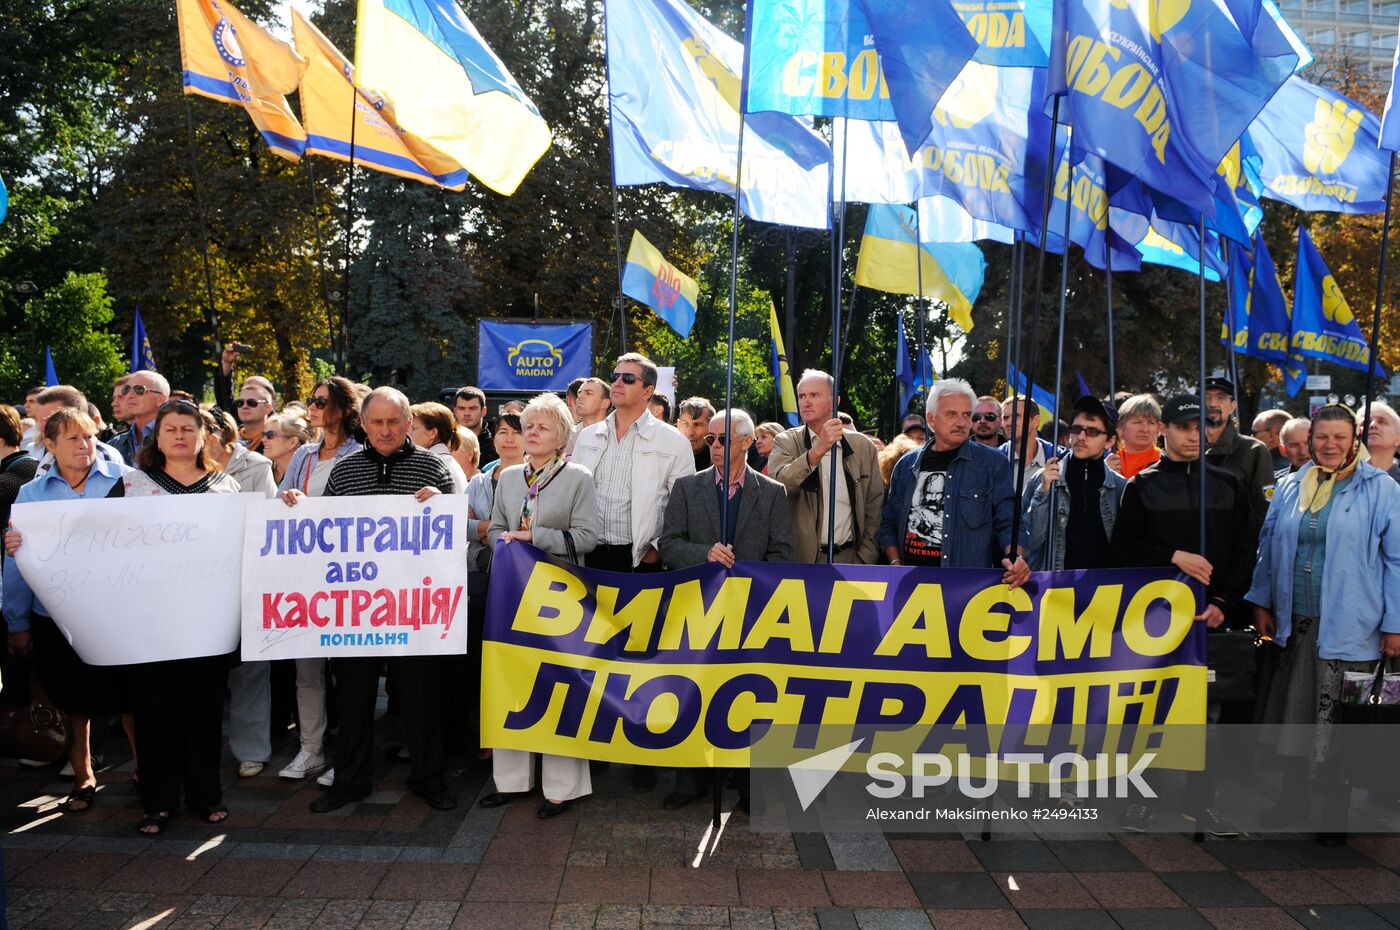 Picket in Kiev in support of law on authority lustration